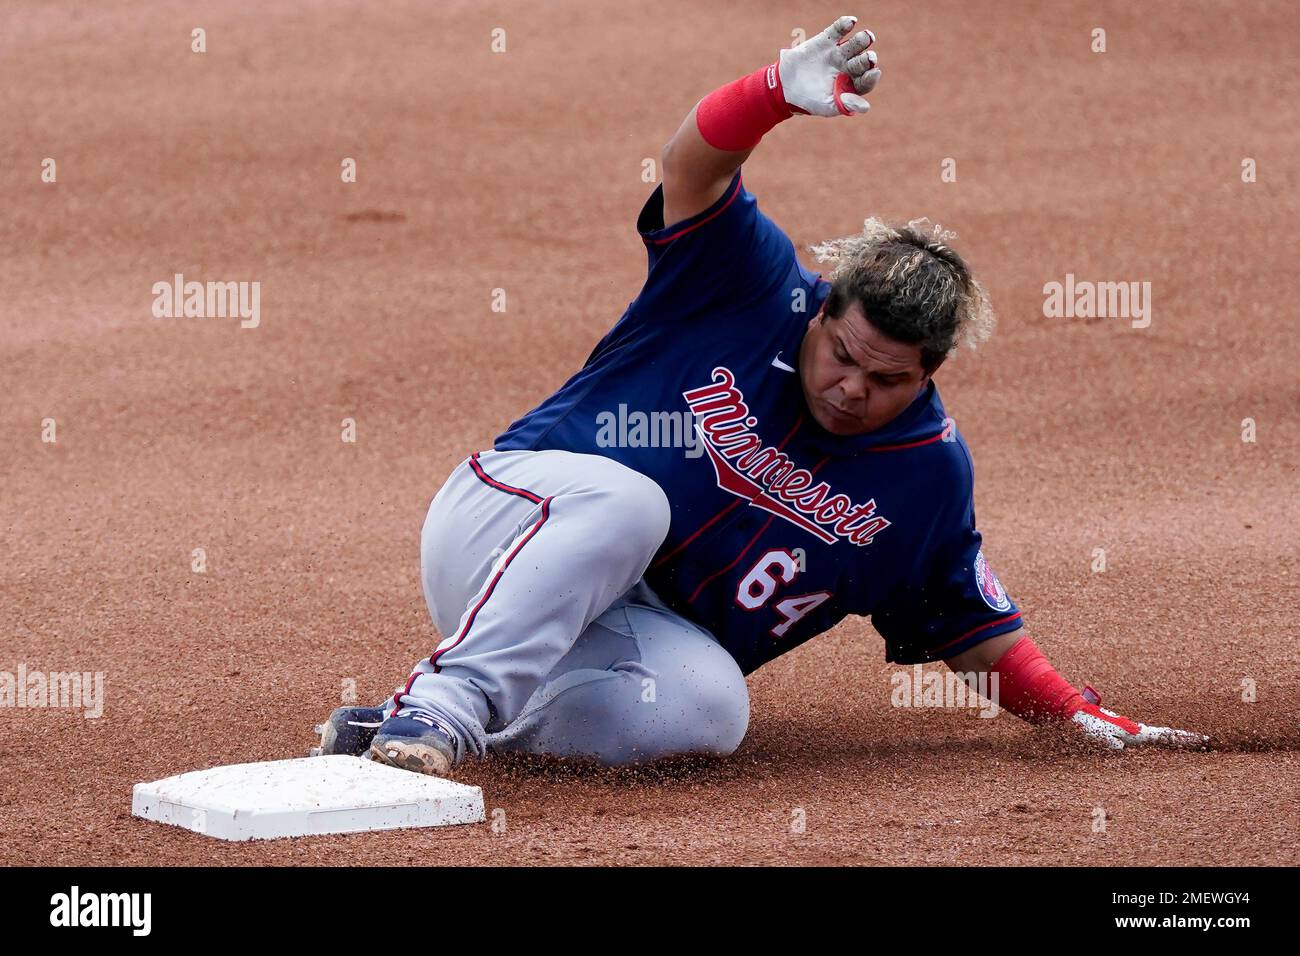 Minnesota Twins catcher Willians Astudillo (64) slides into second base  with a double against the Boston Red Sox during a spring training baseball  game Sunday, March 28, 2021, in Fort Myers, Fla. (